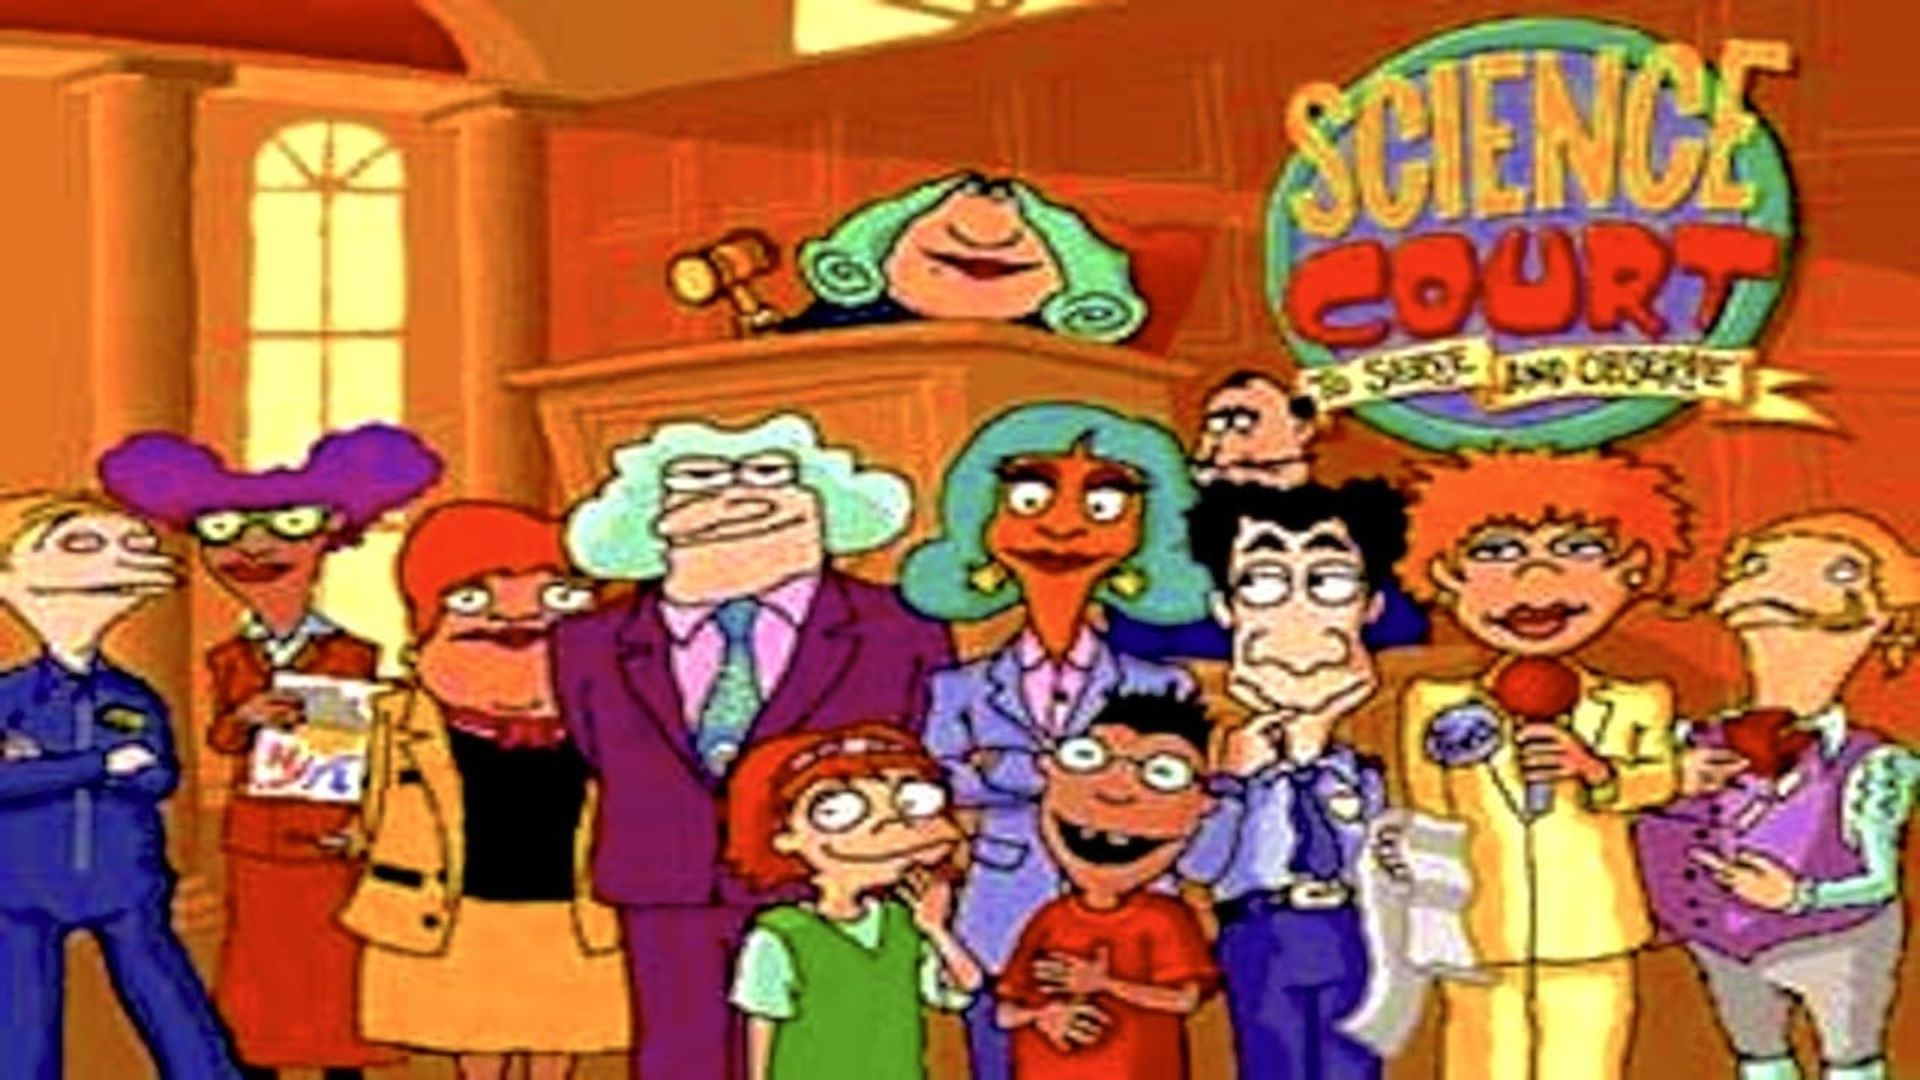 Science Court background